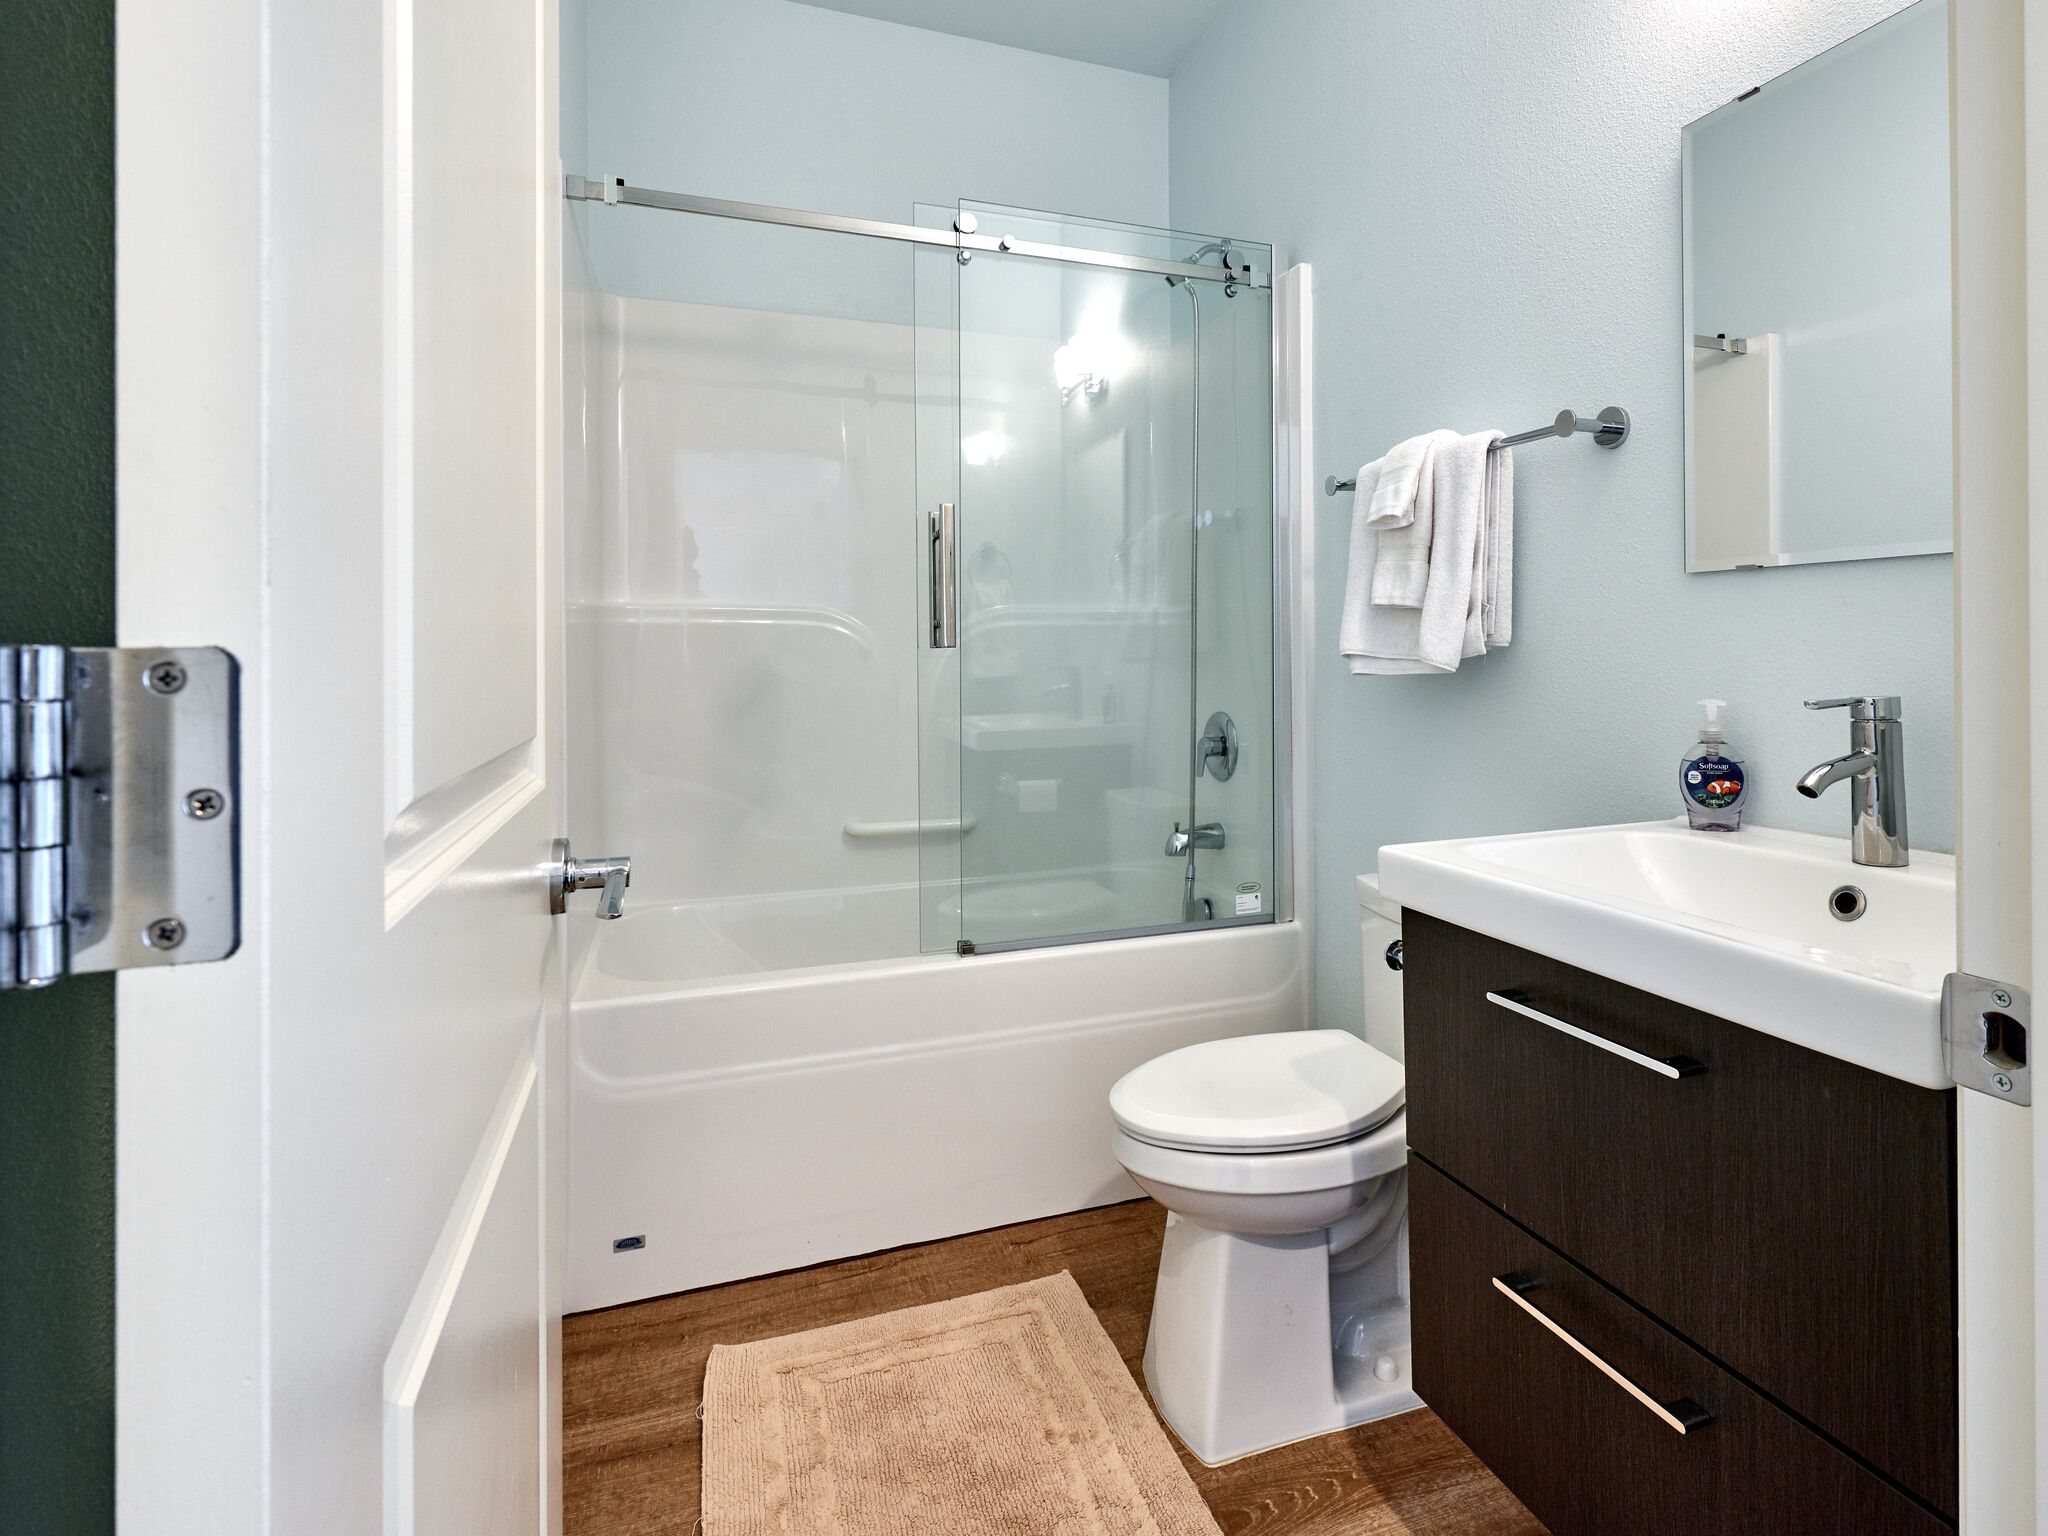 Vacation home bathroom with tub/shower combo.